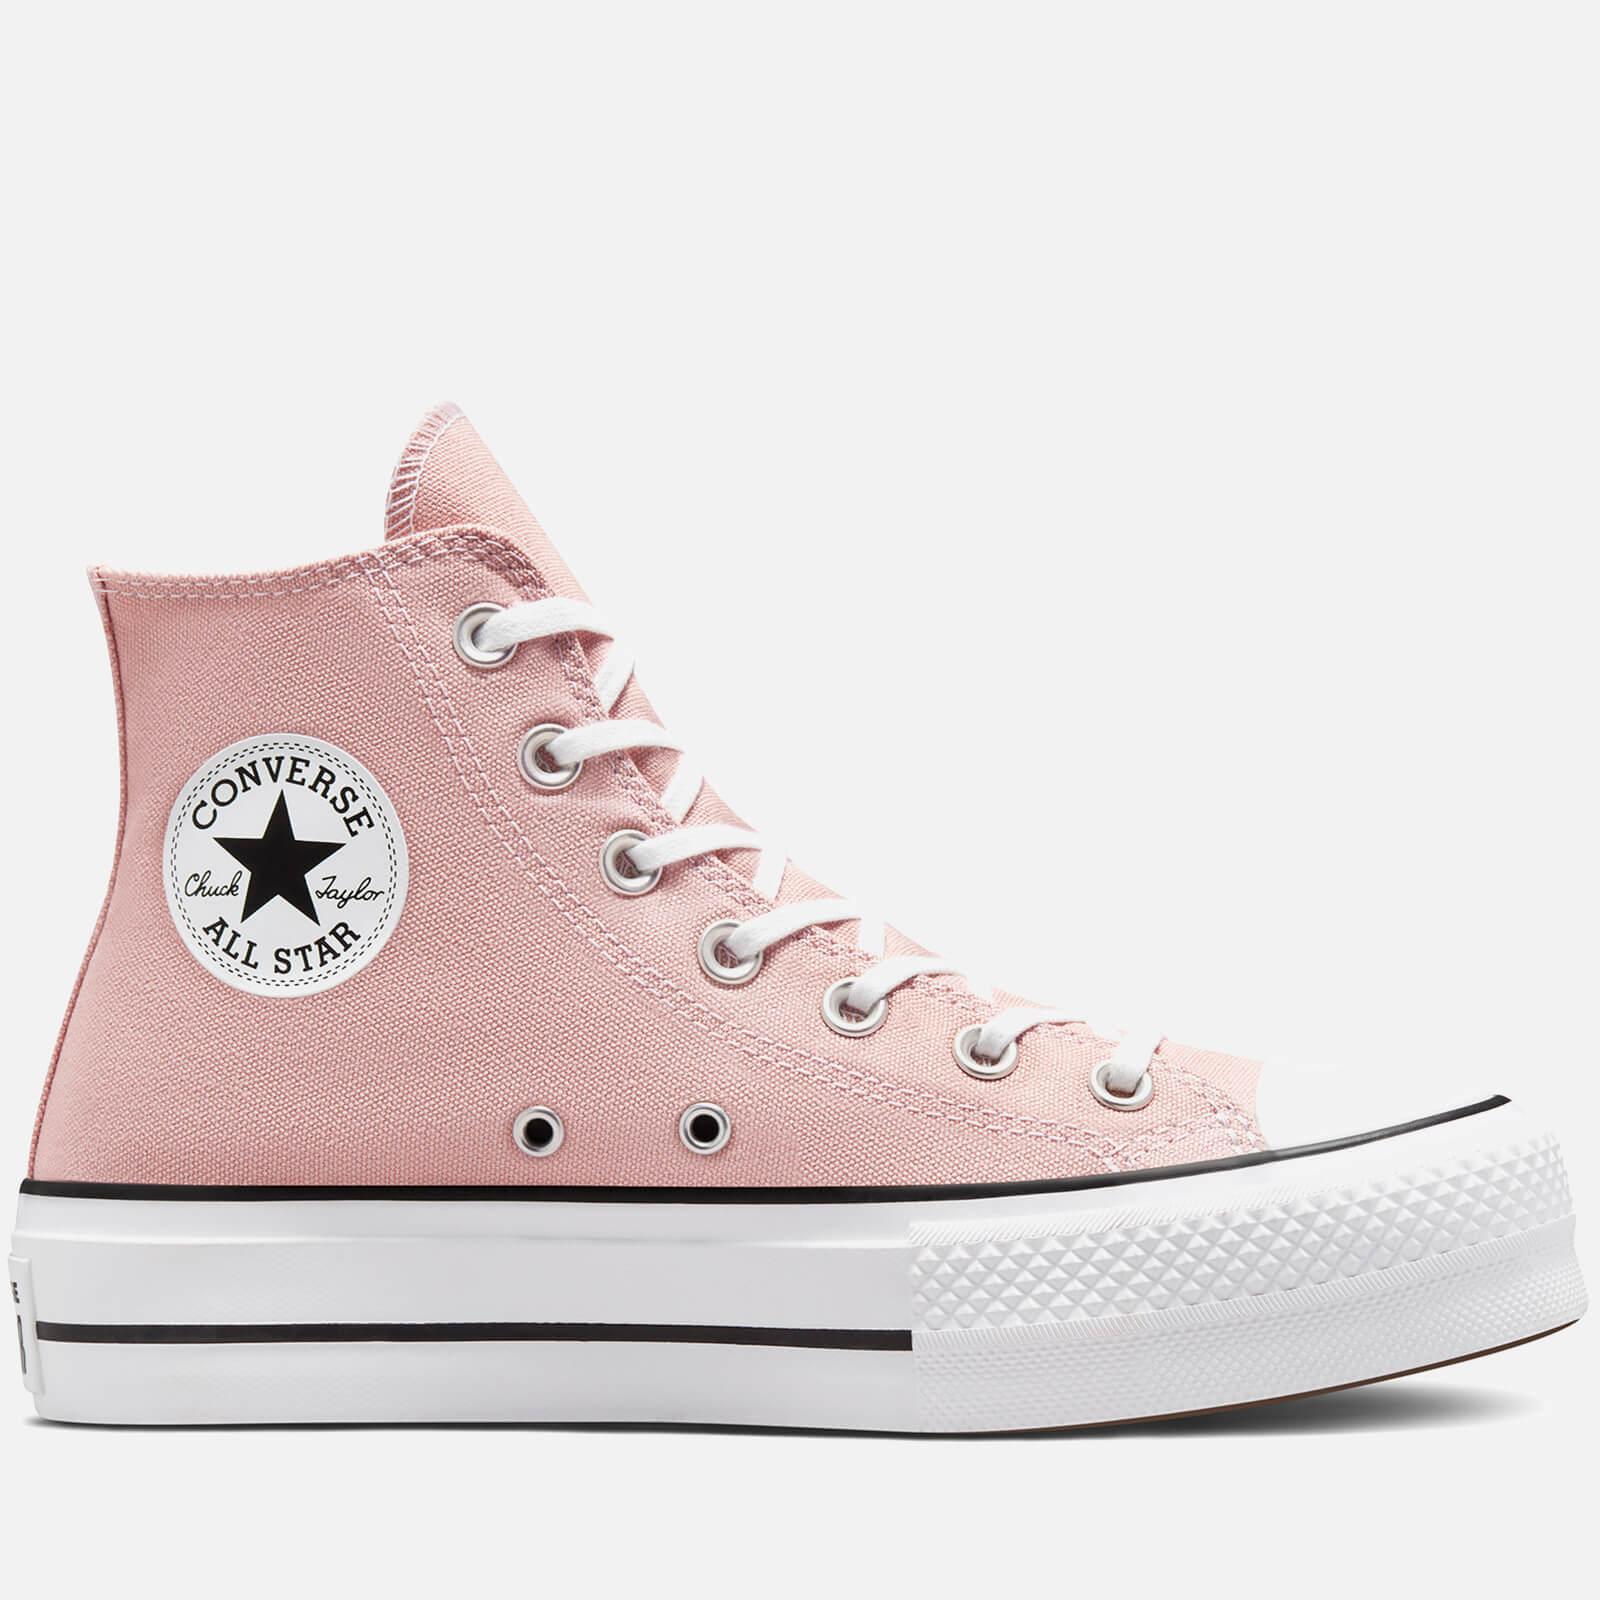 Converse Canvas Chuck Taylor All Star Lift Hi-top Trainers in Pink | Lyst